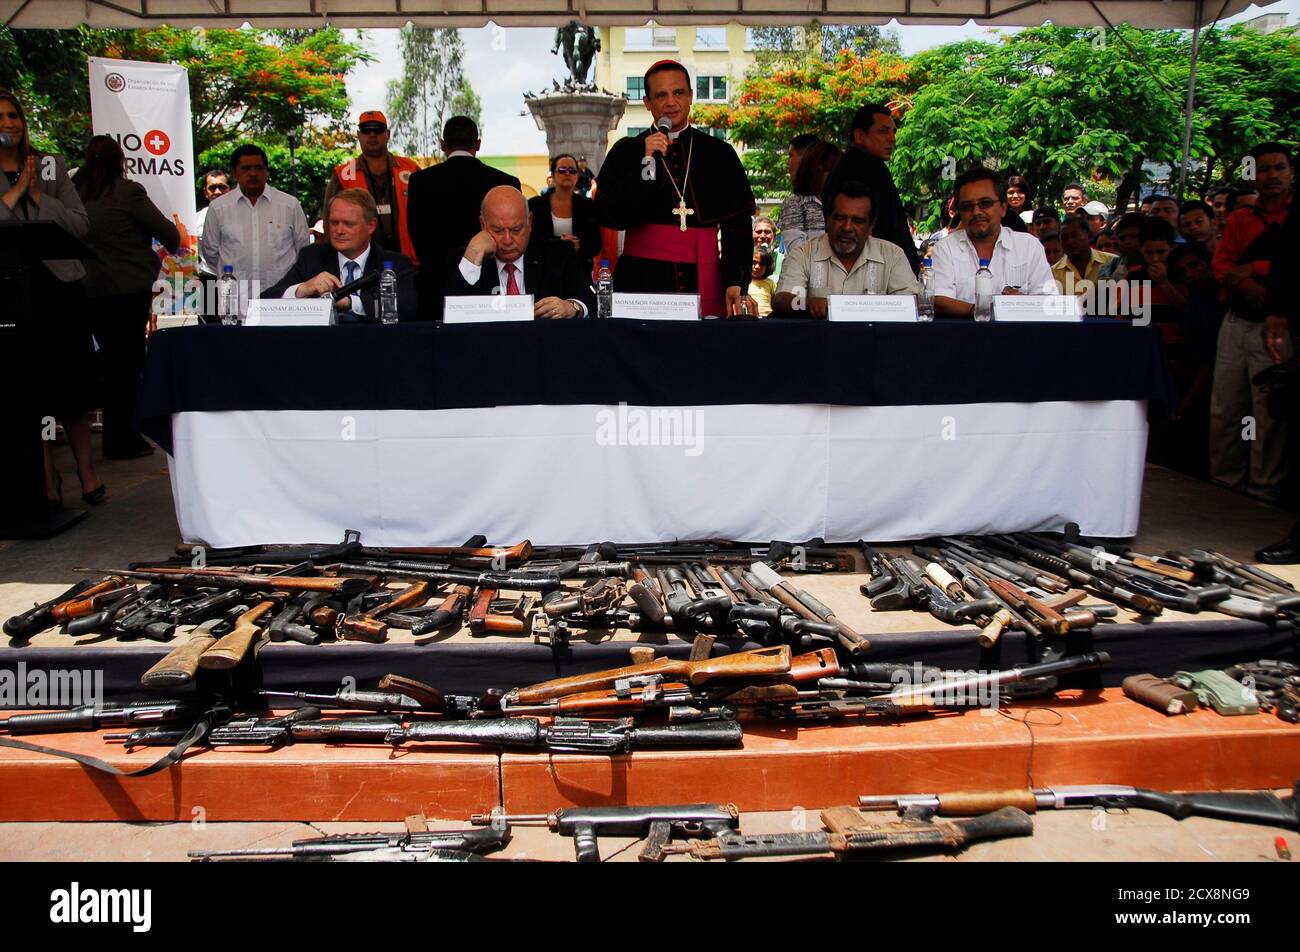 Army chaplain Fabio Colindres (C) speaks next to Jose Miguel Insulza (2nd  L), secretary general of the Organization of American States (OAS), in  front of weapons handed over by gang members as